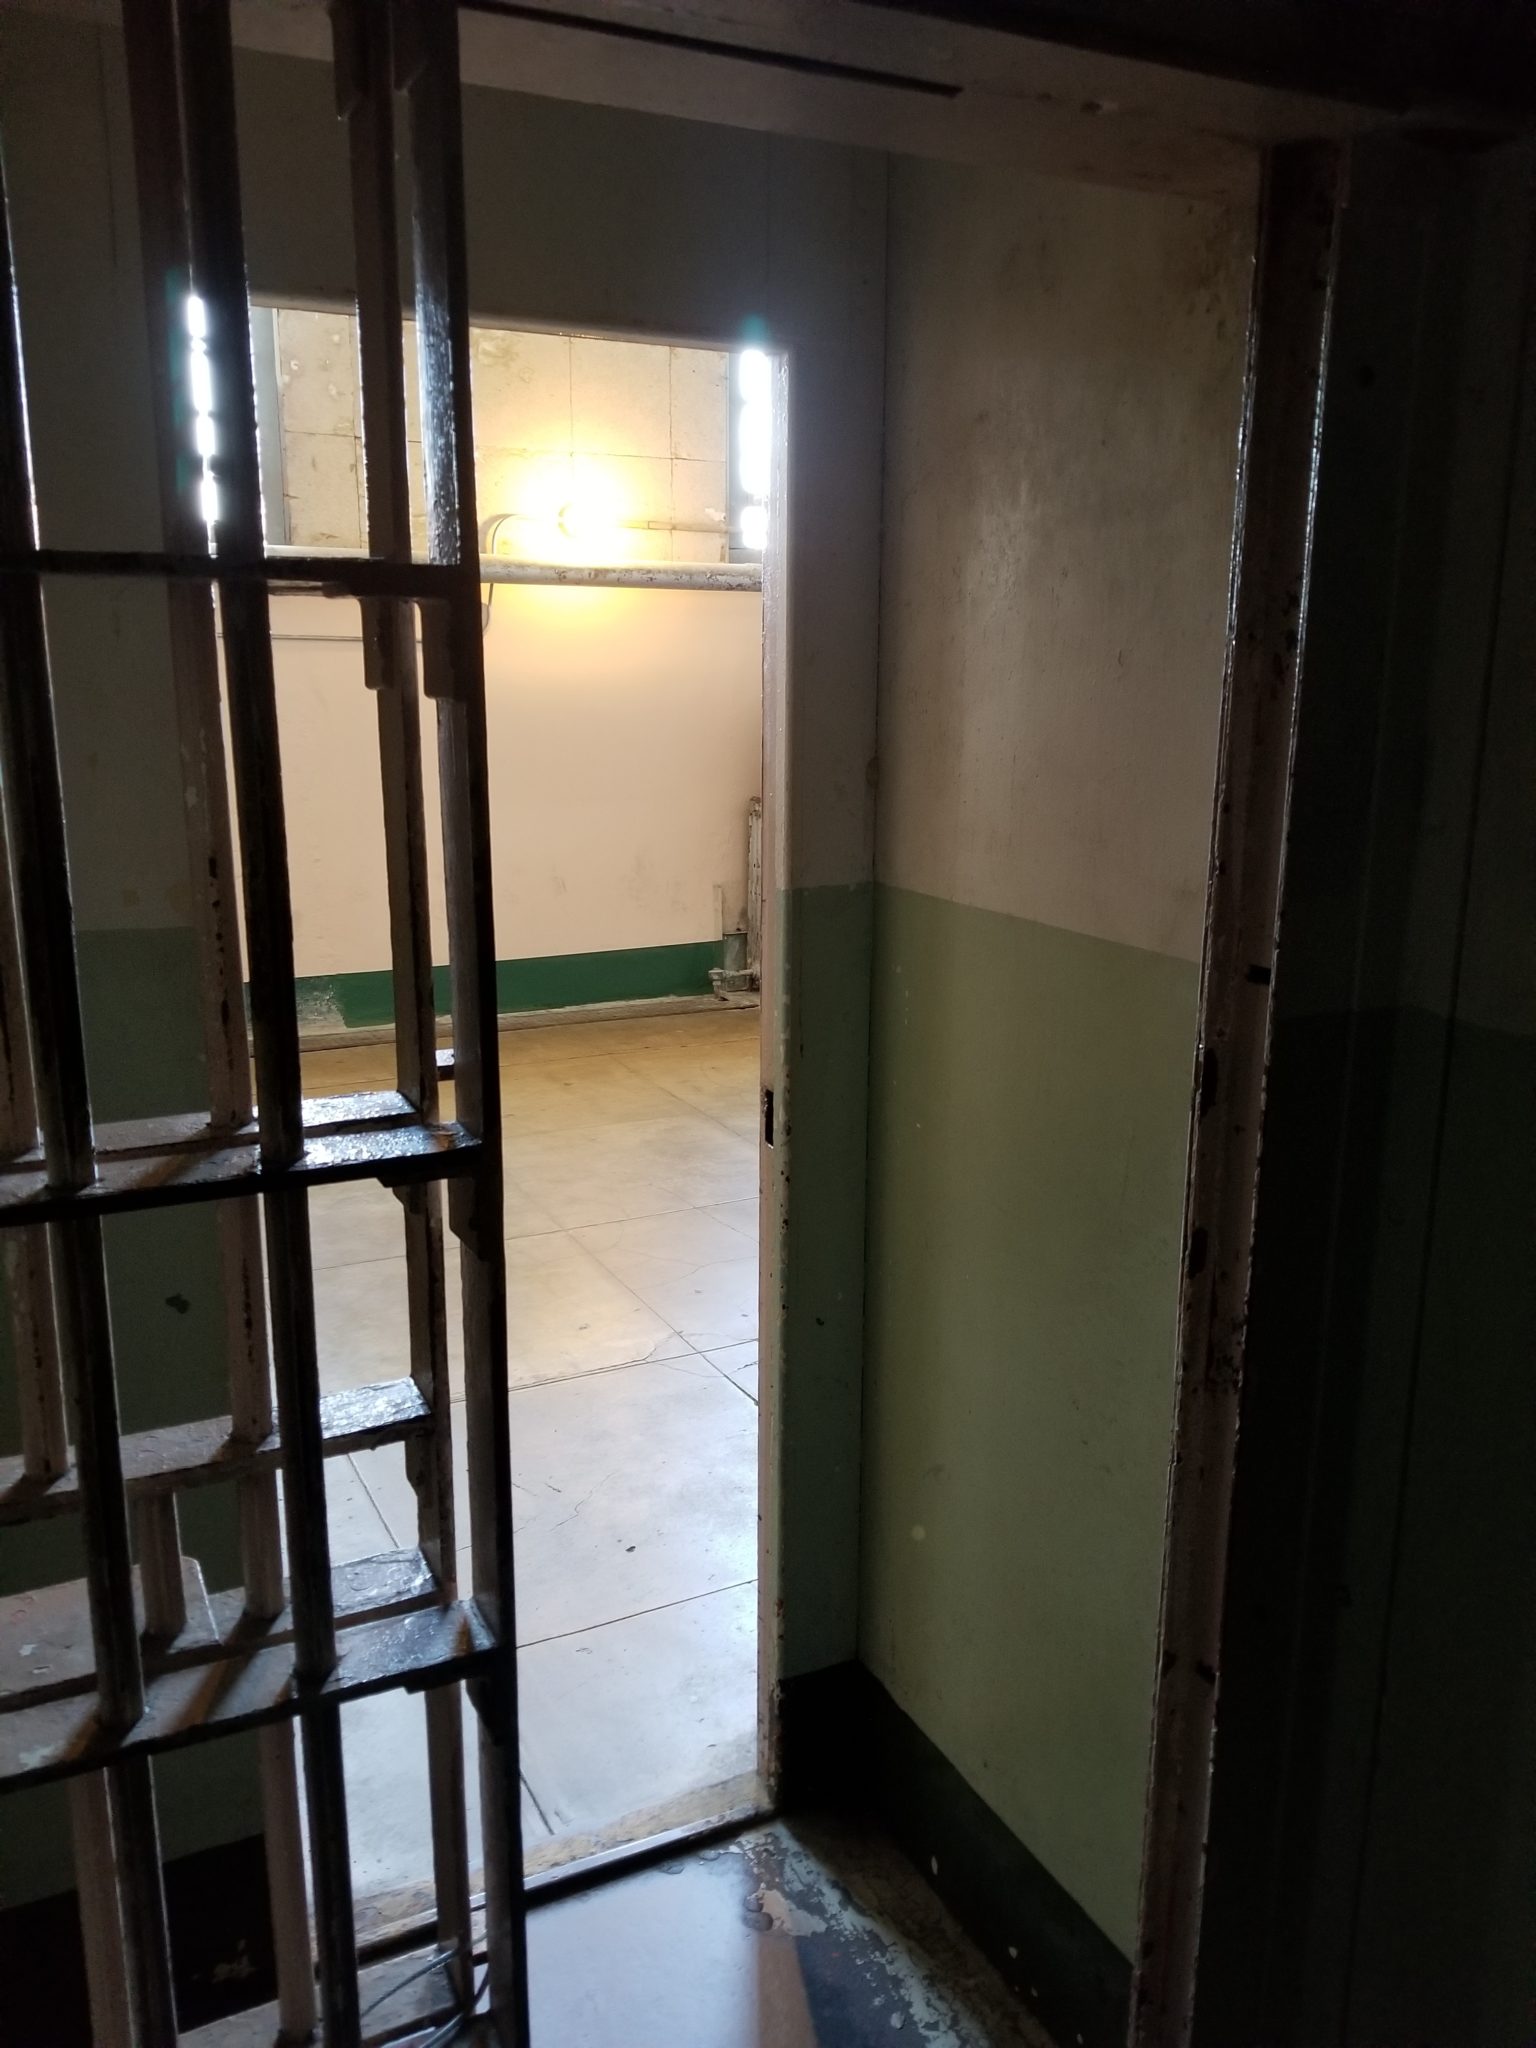 a prison cell door with bars